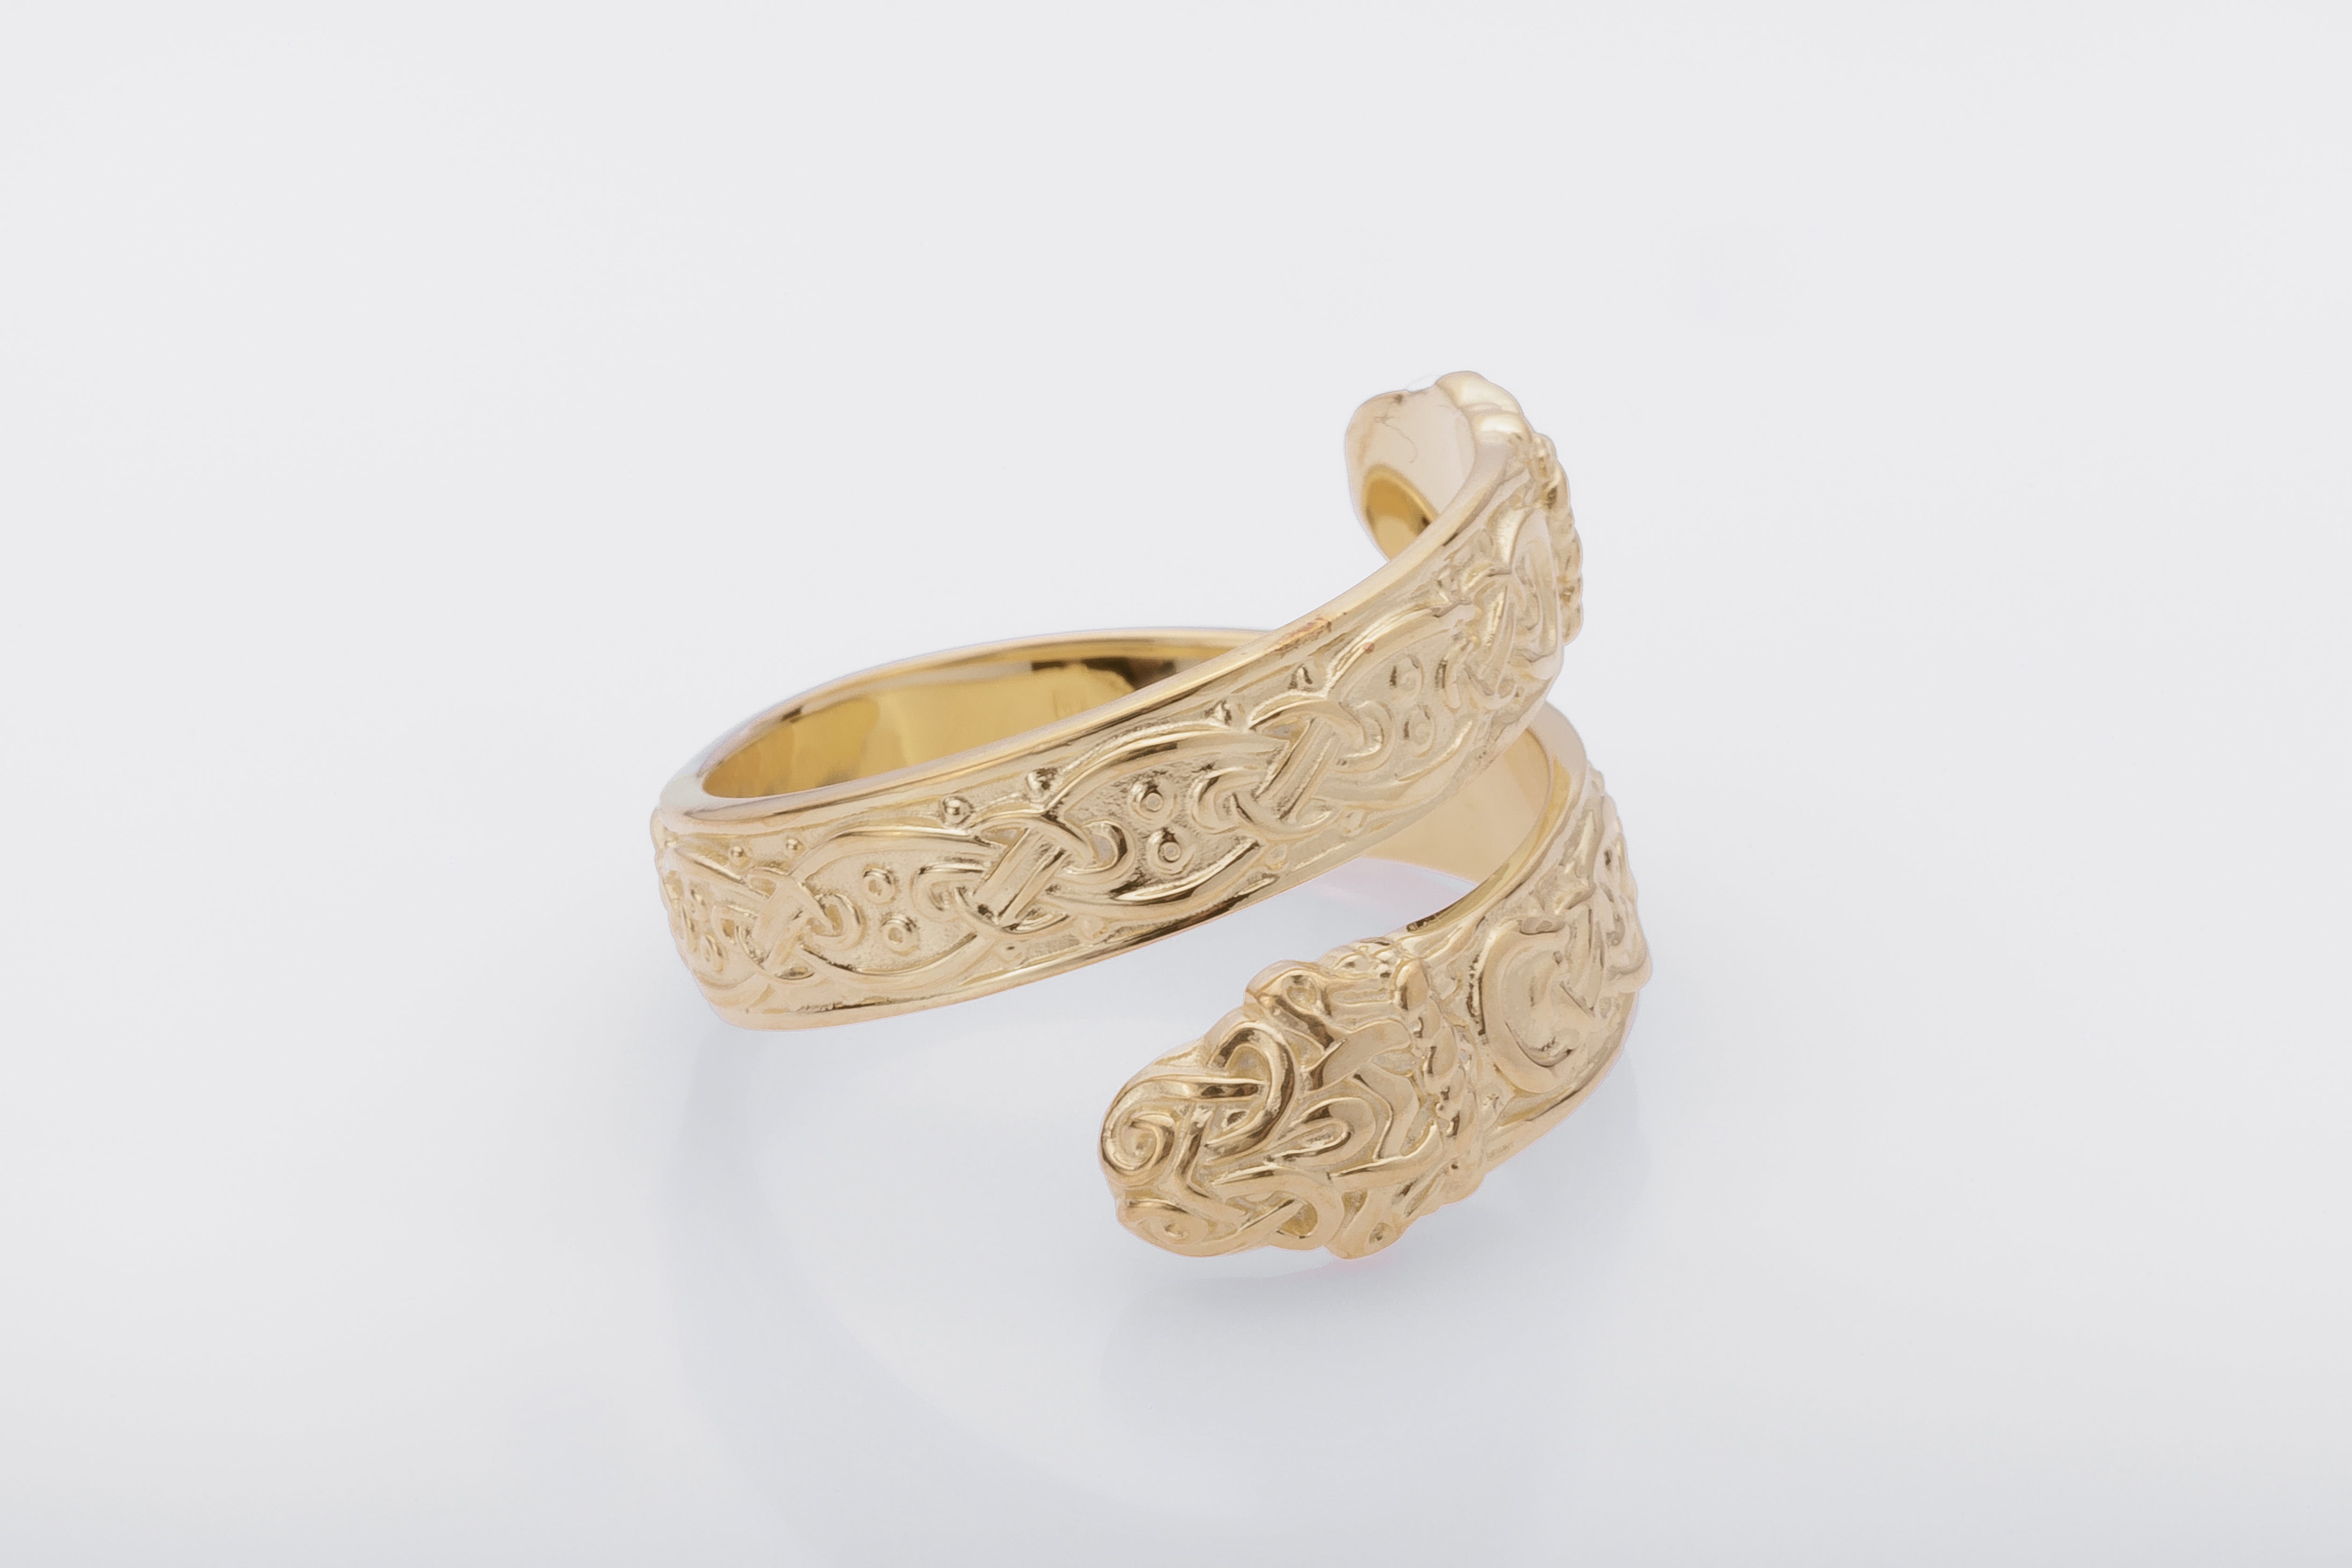 14K Ouroboros Ring with Viking Ornament Norse Jewelry - vikingworkshop